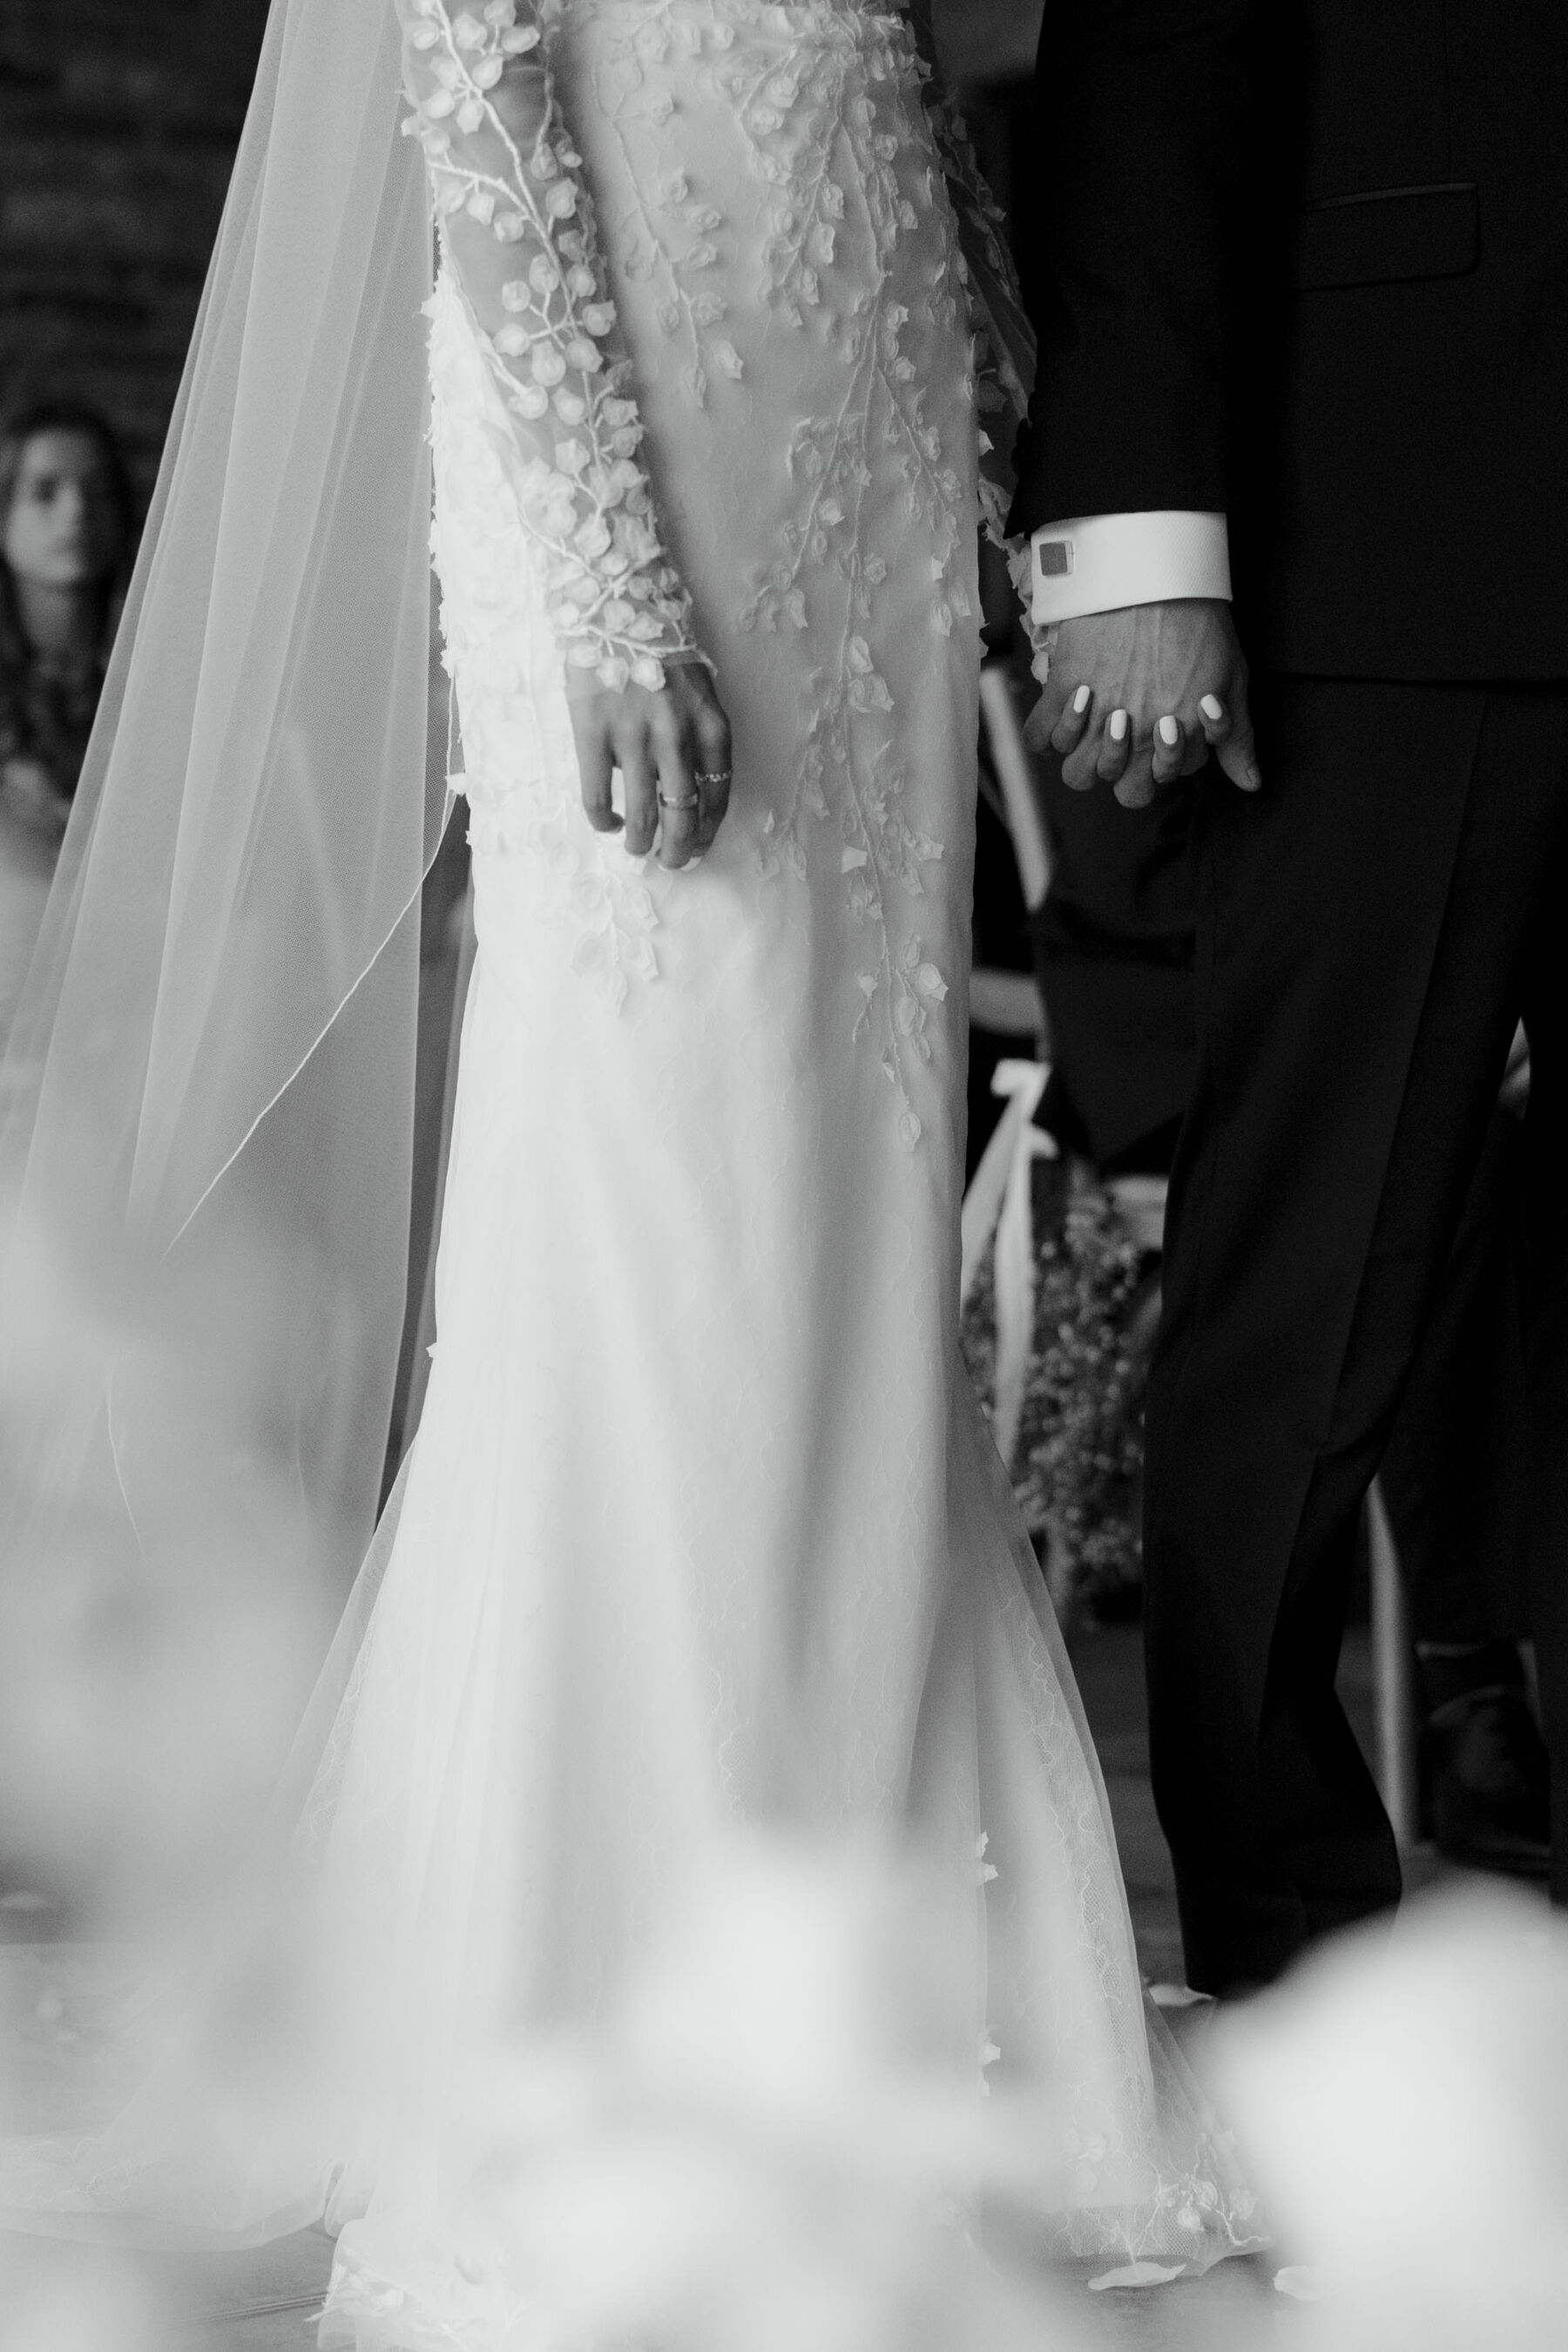  Bride and groom holding hands during their wedding ceremony